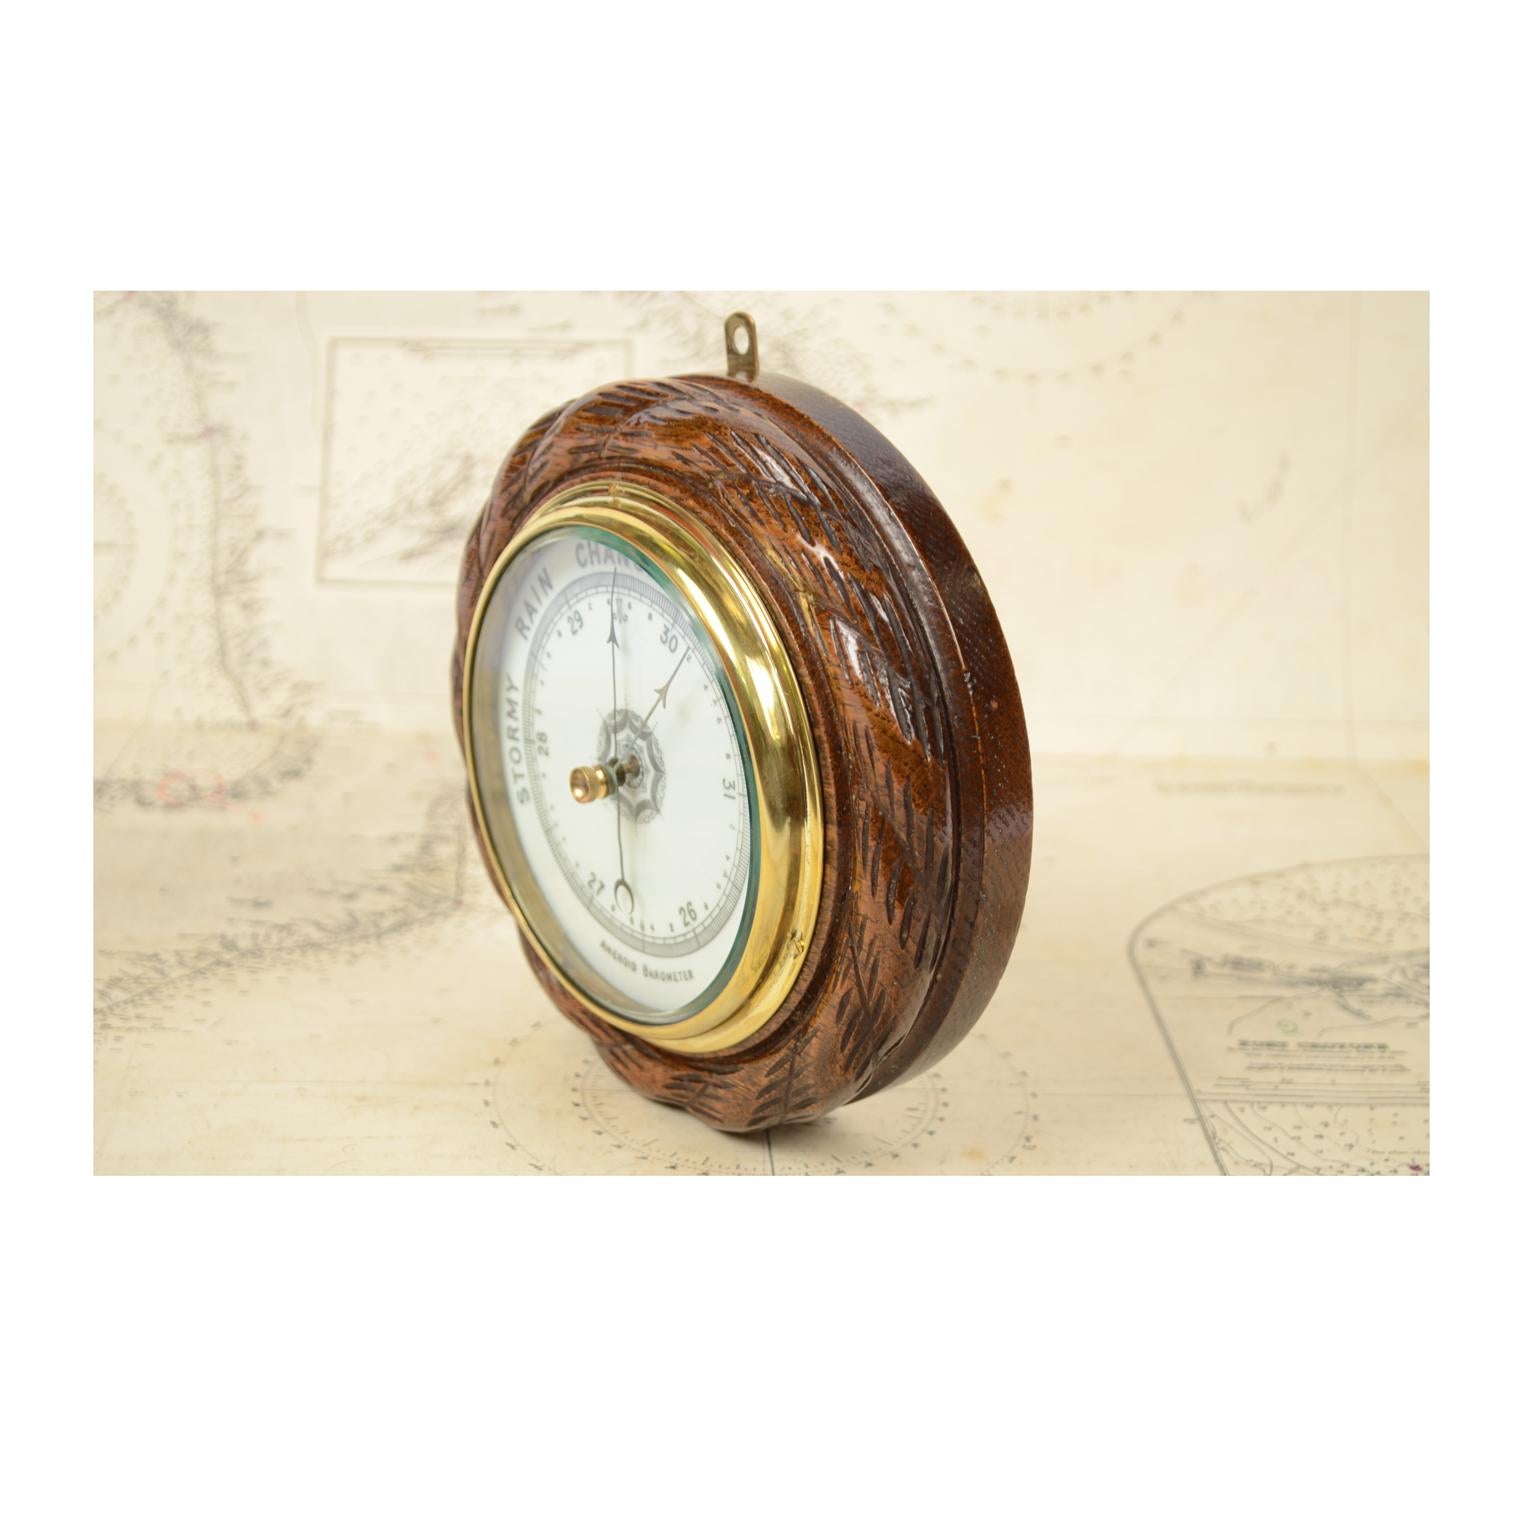 British Barometer made in the Late 1800s in Oakwood Carved like a Rope